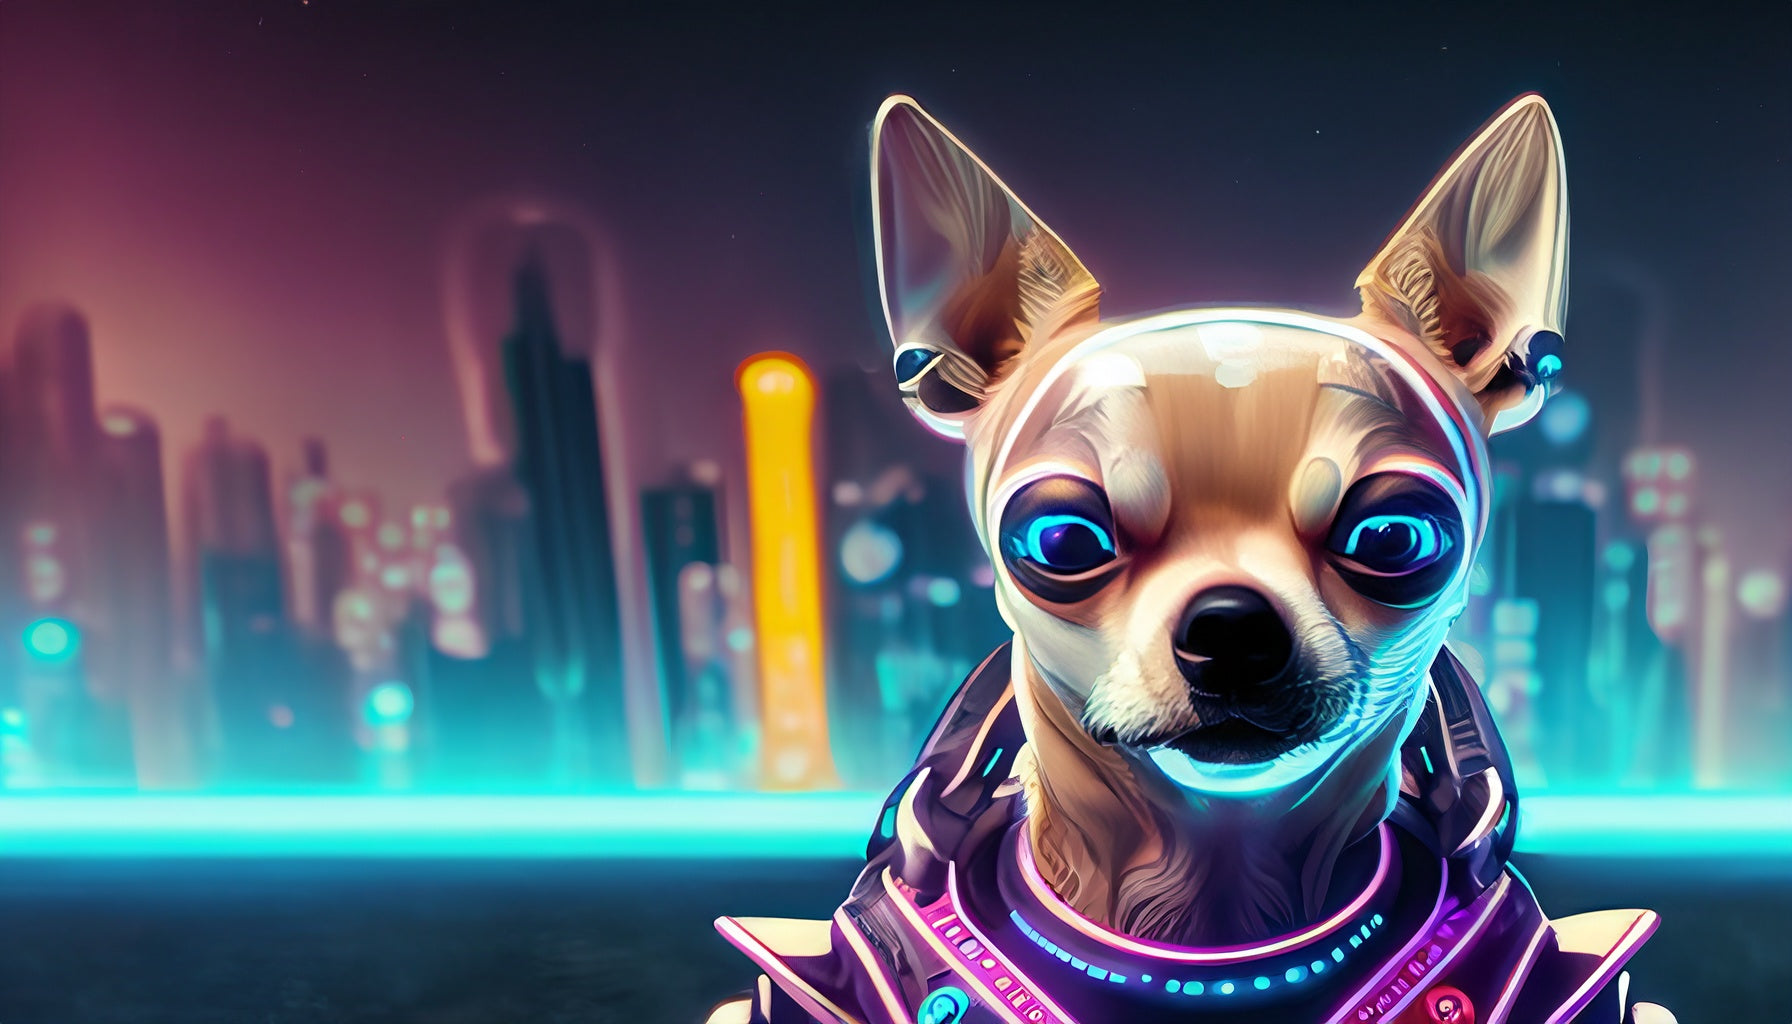 A close up chihuahua who is our performance marketing mascot dressed in a spacesuit with a futuristic city in the background